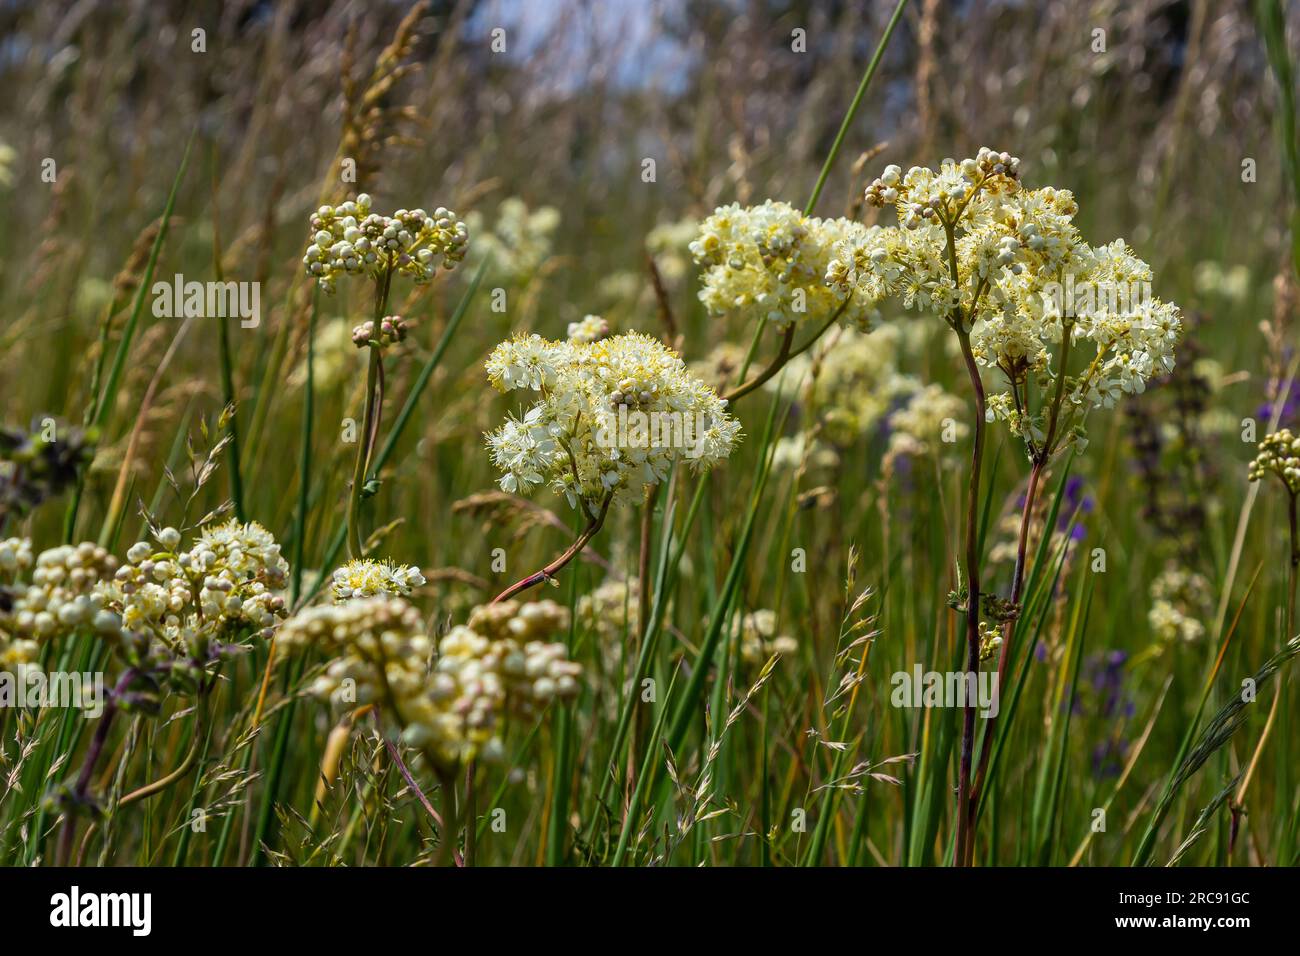 Flowering spring meadow. Filipendula vulgaris, commonly known as dropwort or fern-leaf dropwort. Place for text, blurred background. Stock Photo